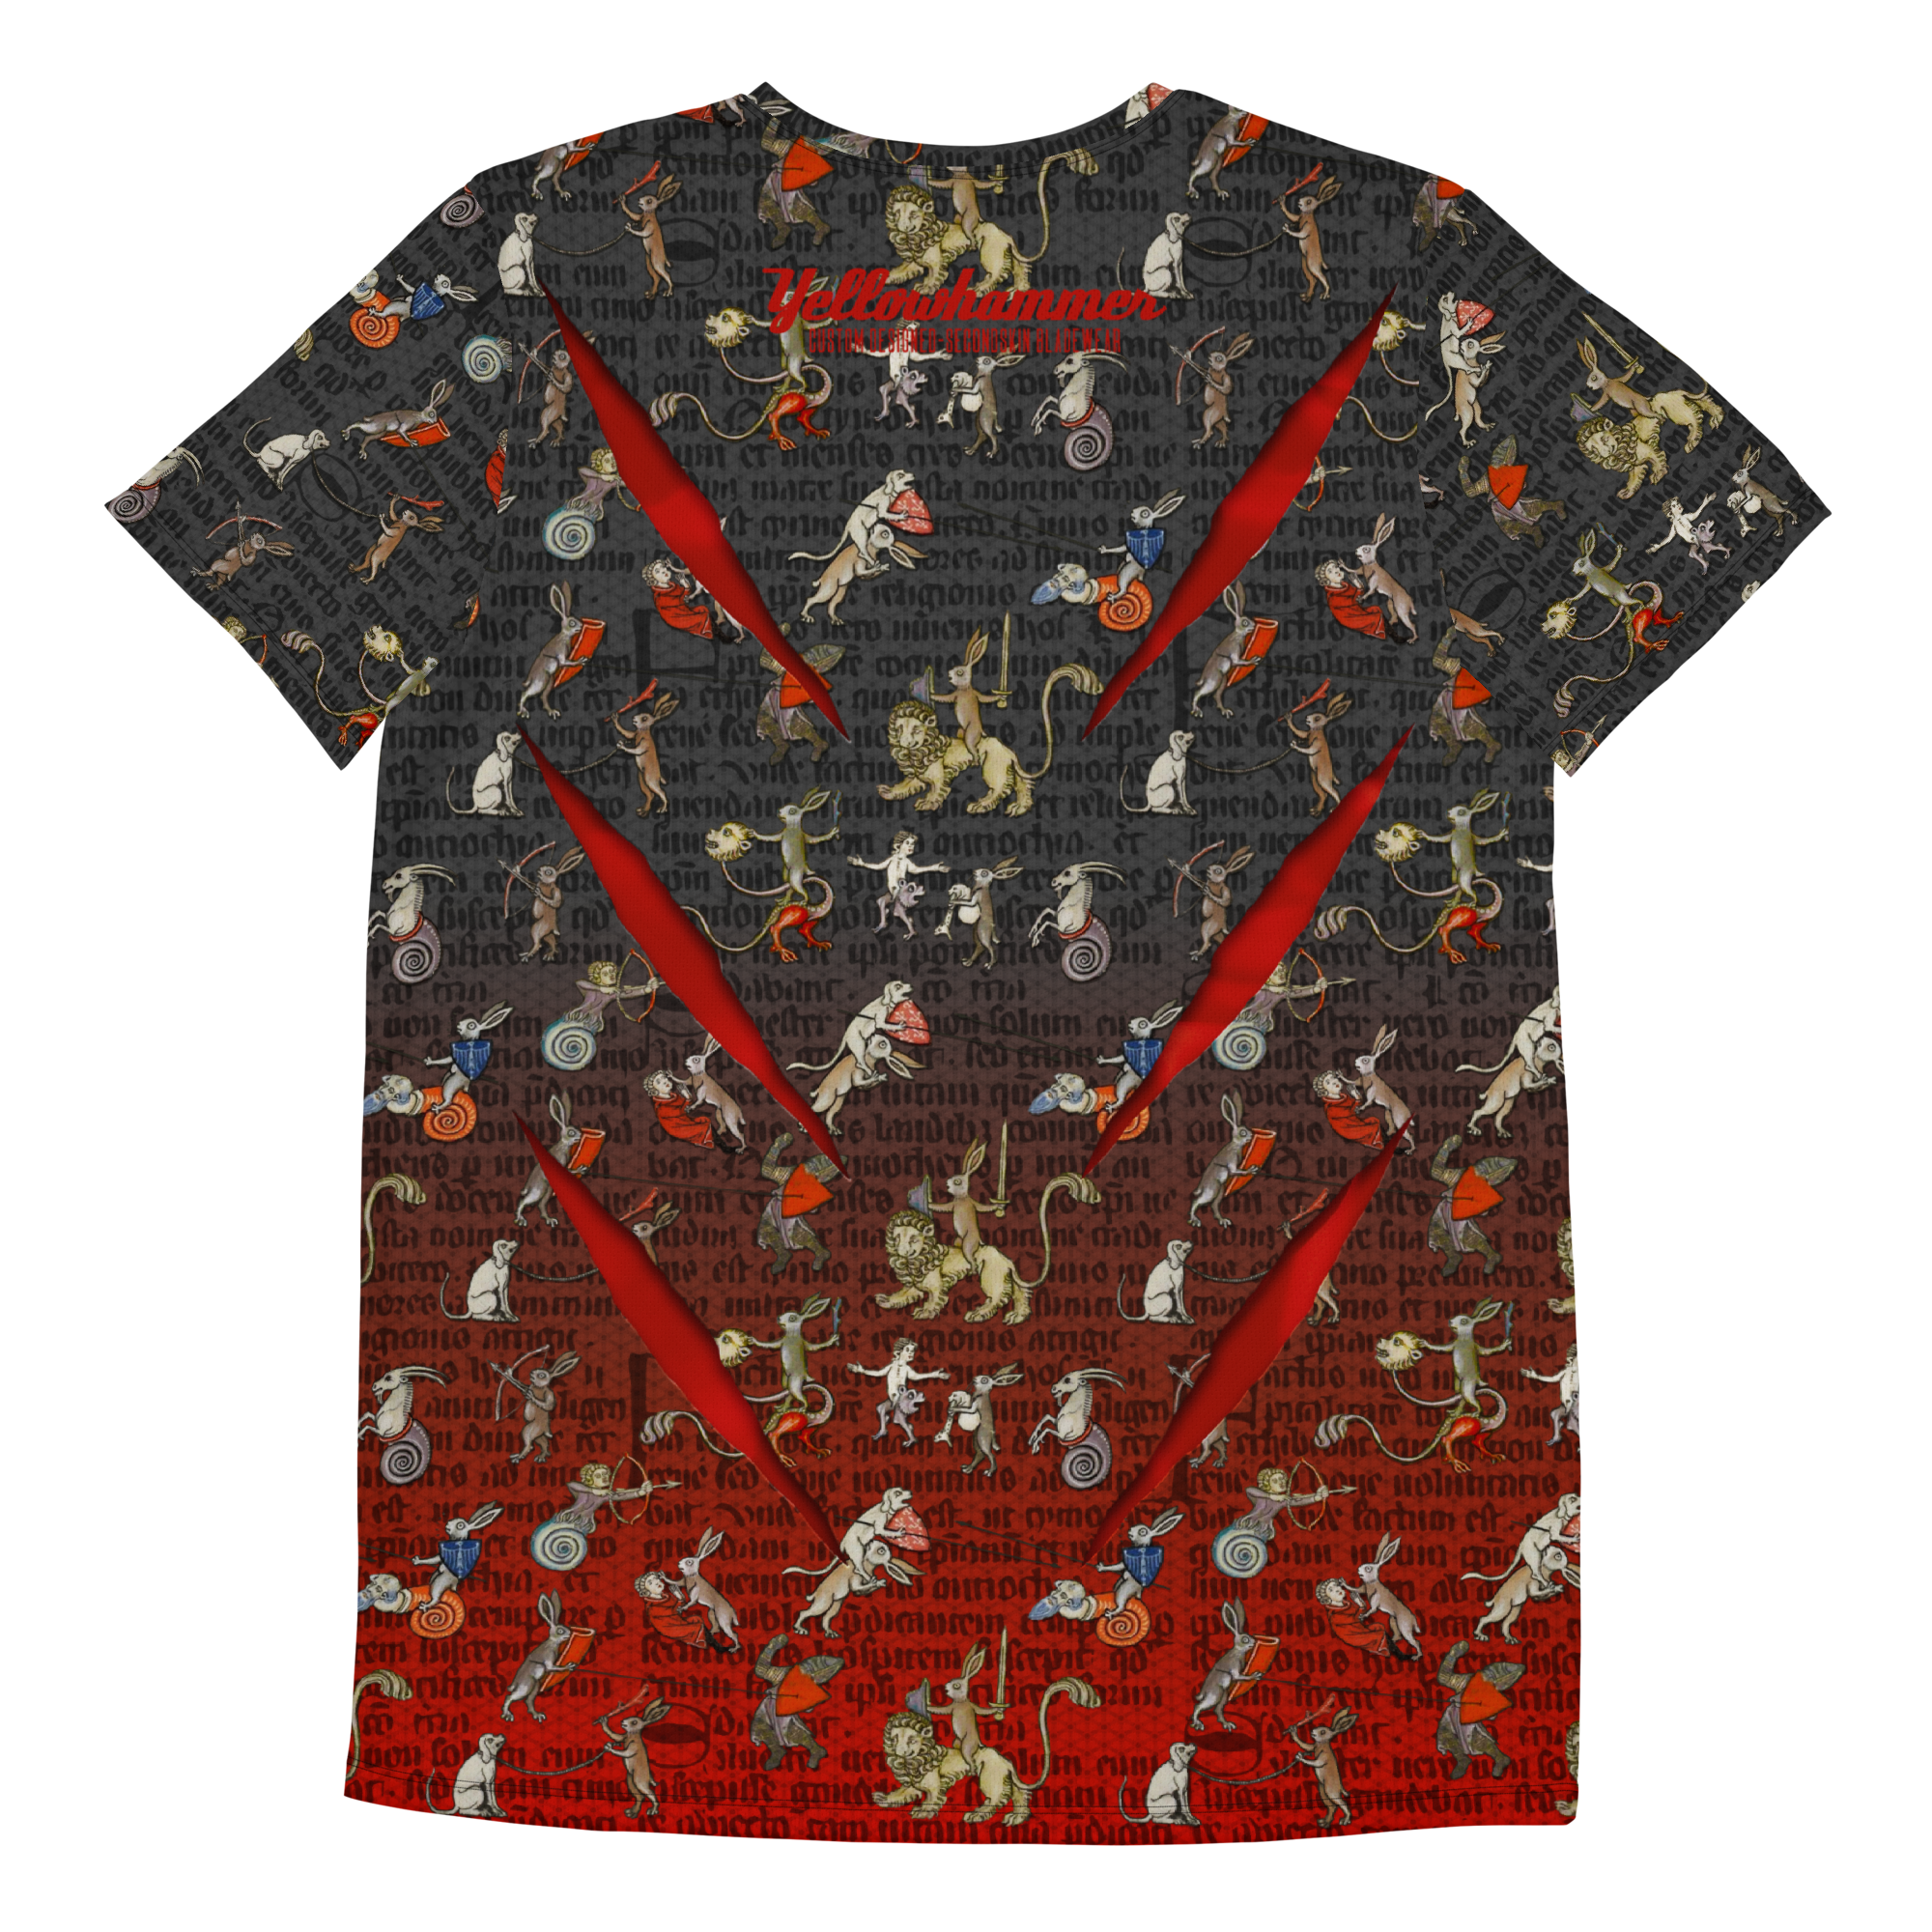 MANIC RABSAll-Over Print Men's Athletic T-shirt